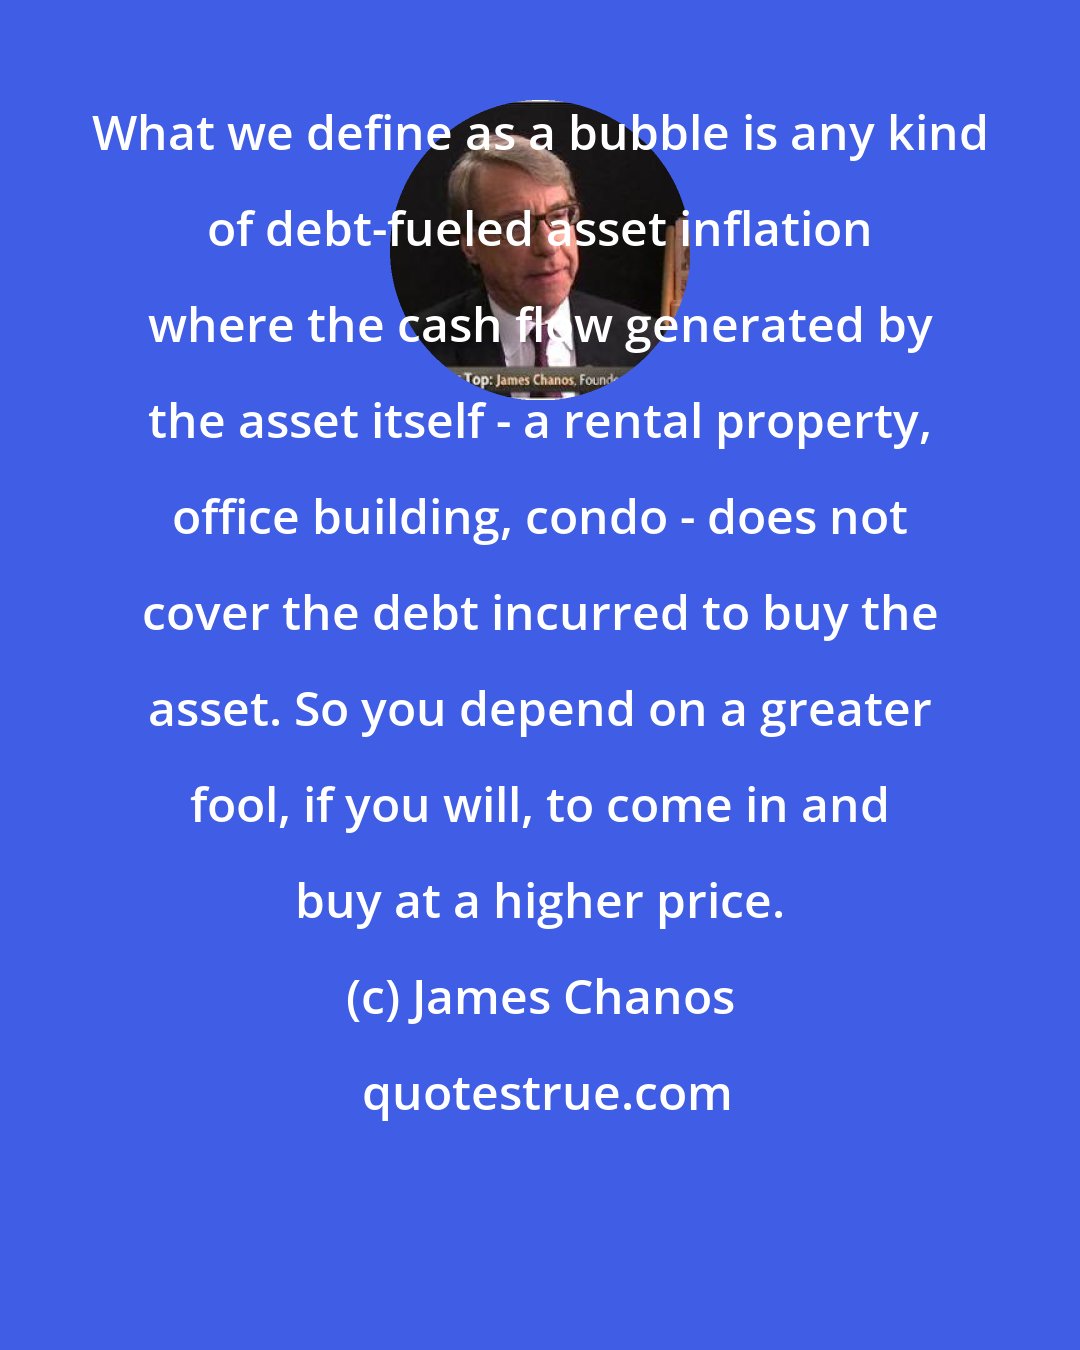 James Chanos: What we define as a bubble is any kind of debt-fueled asset inflation where the cash flow generated by the asset itself - a rental property, office building, condo - does not cover the debt incurred to buy the asset. So you depend on a greater fool, if you will, to come in and buy at a higher price.